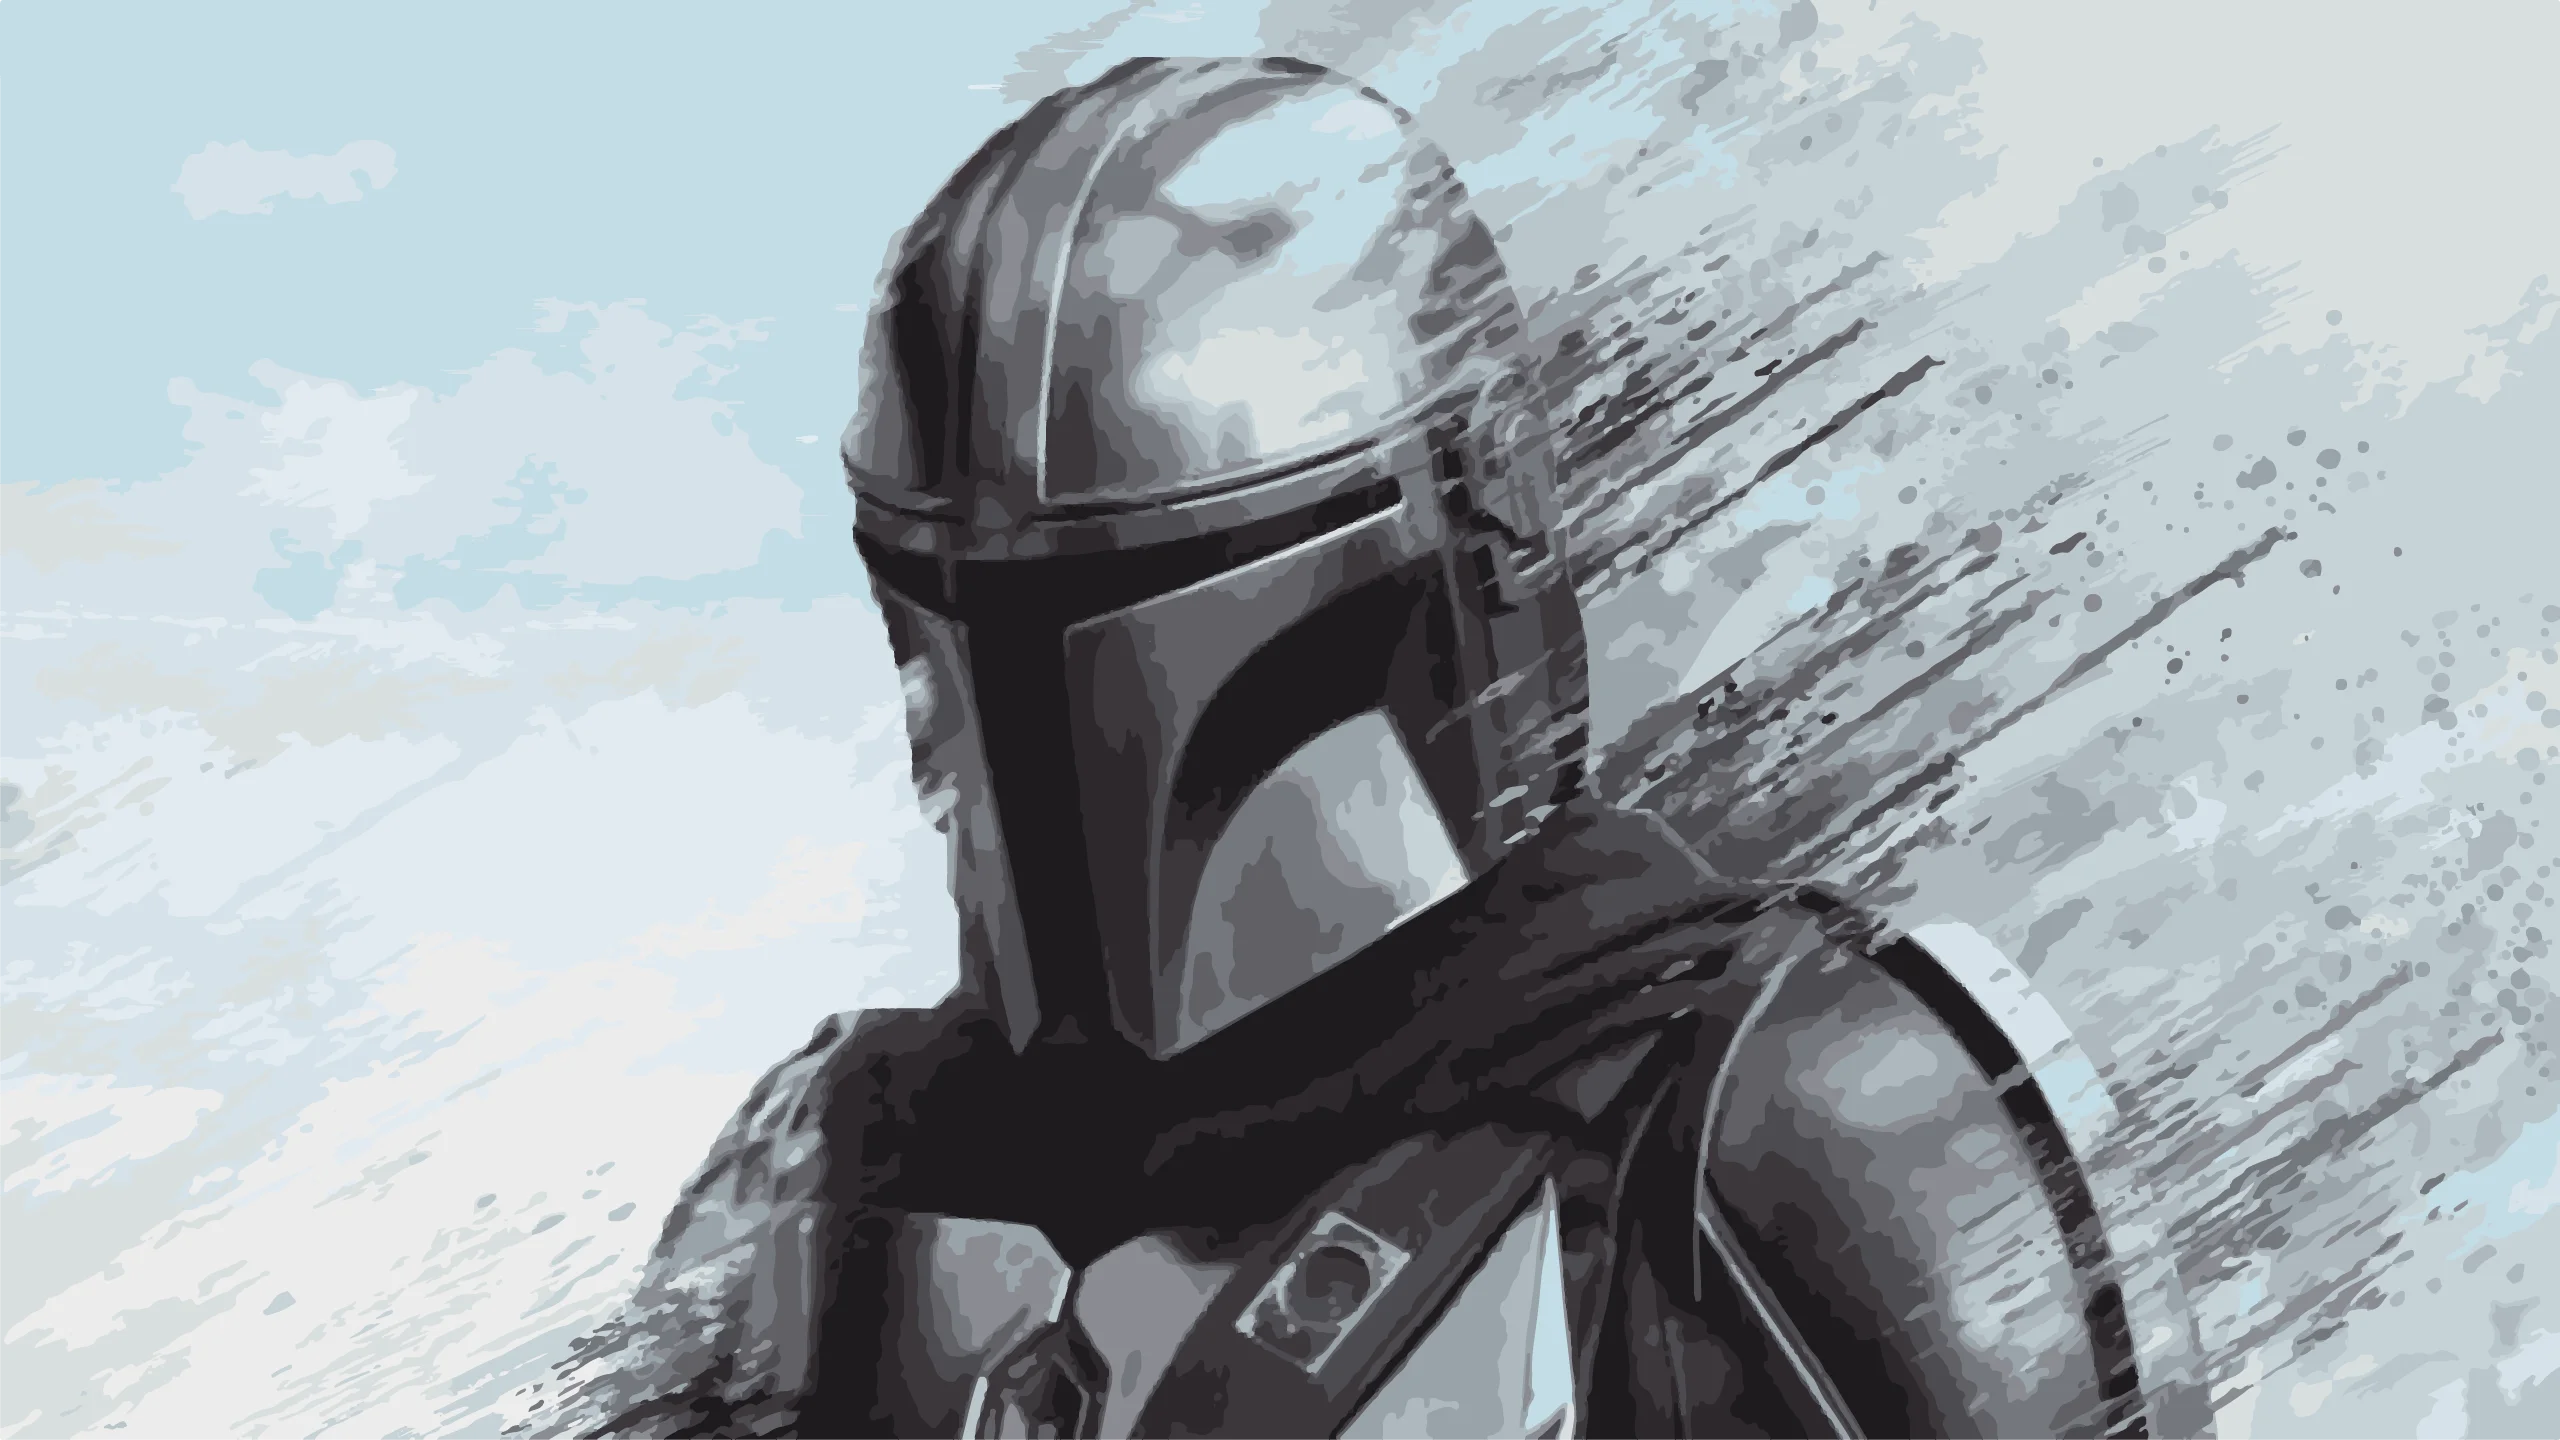 The artist showed the concepts of a non-existent game based on the series "The Mandalorian" and impressed the players